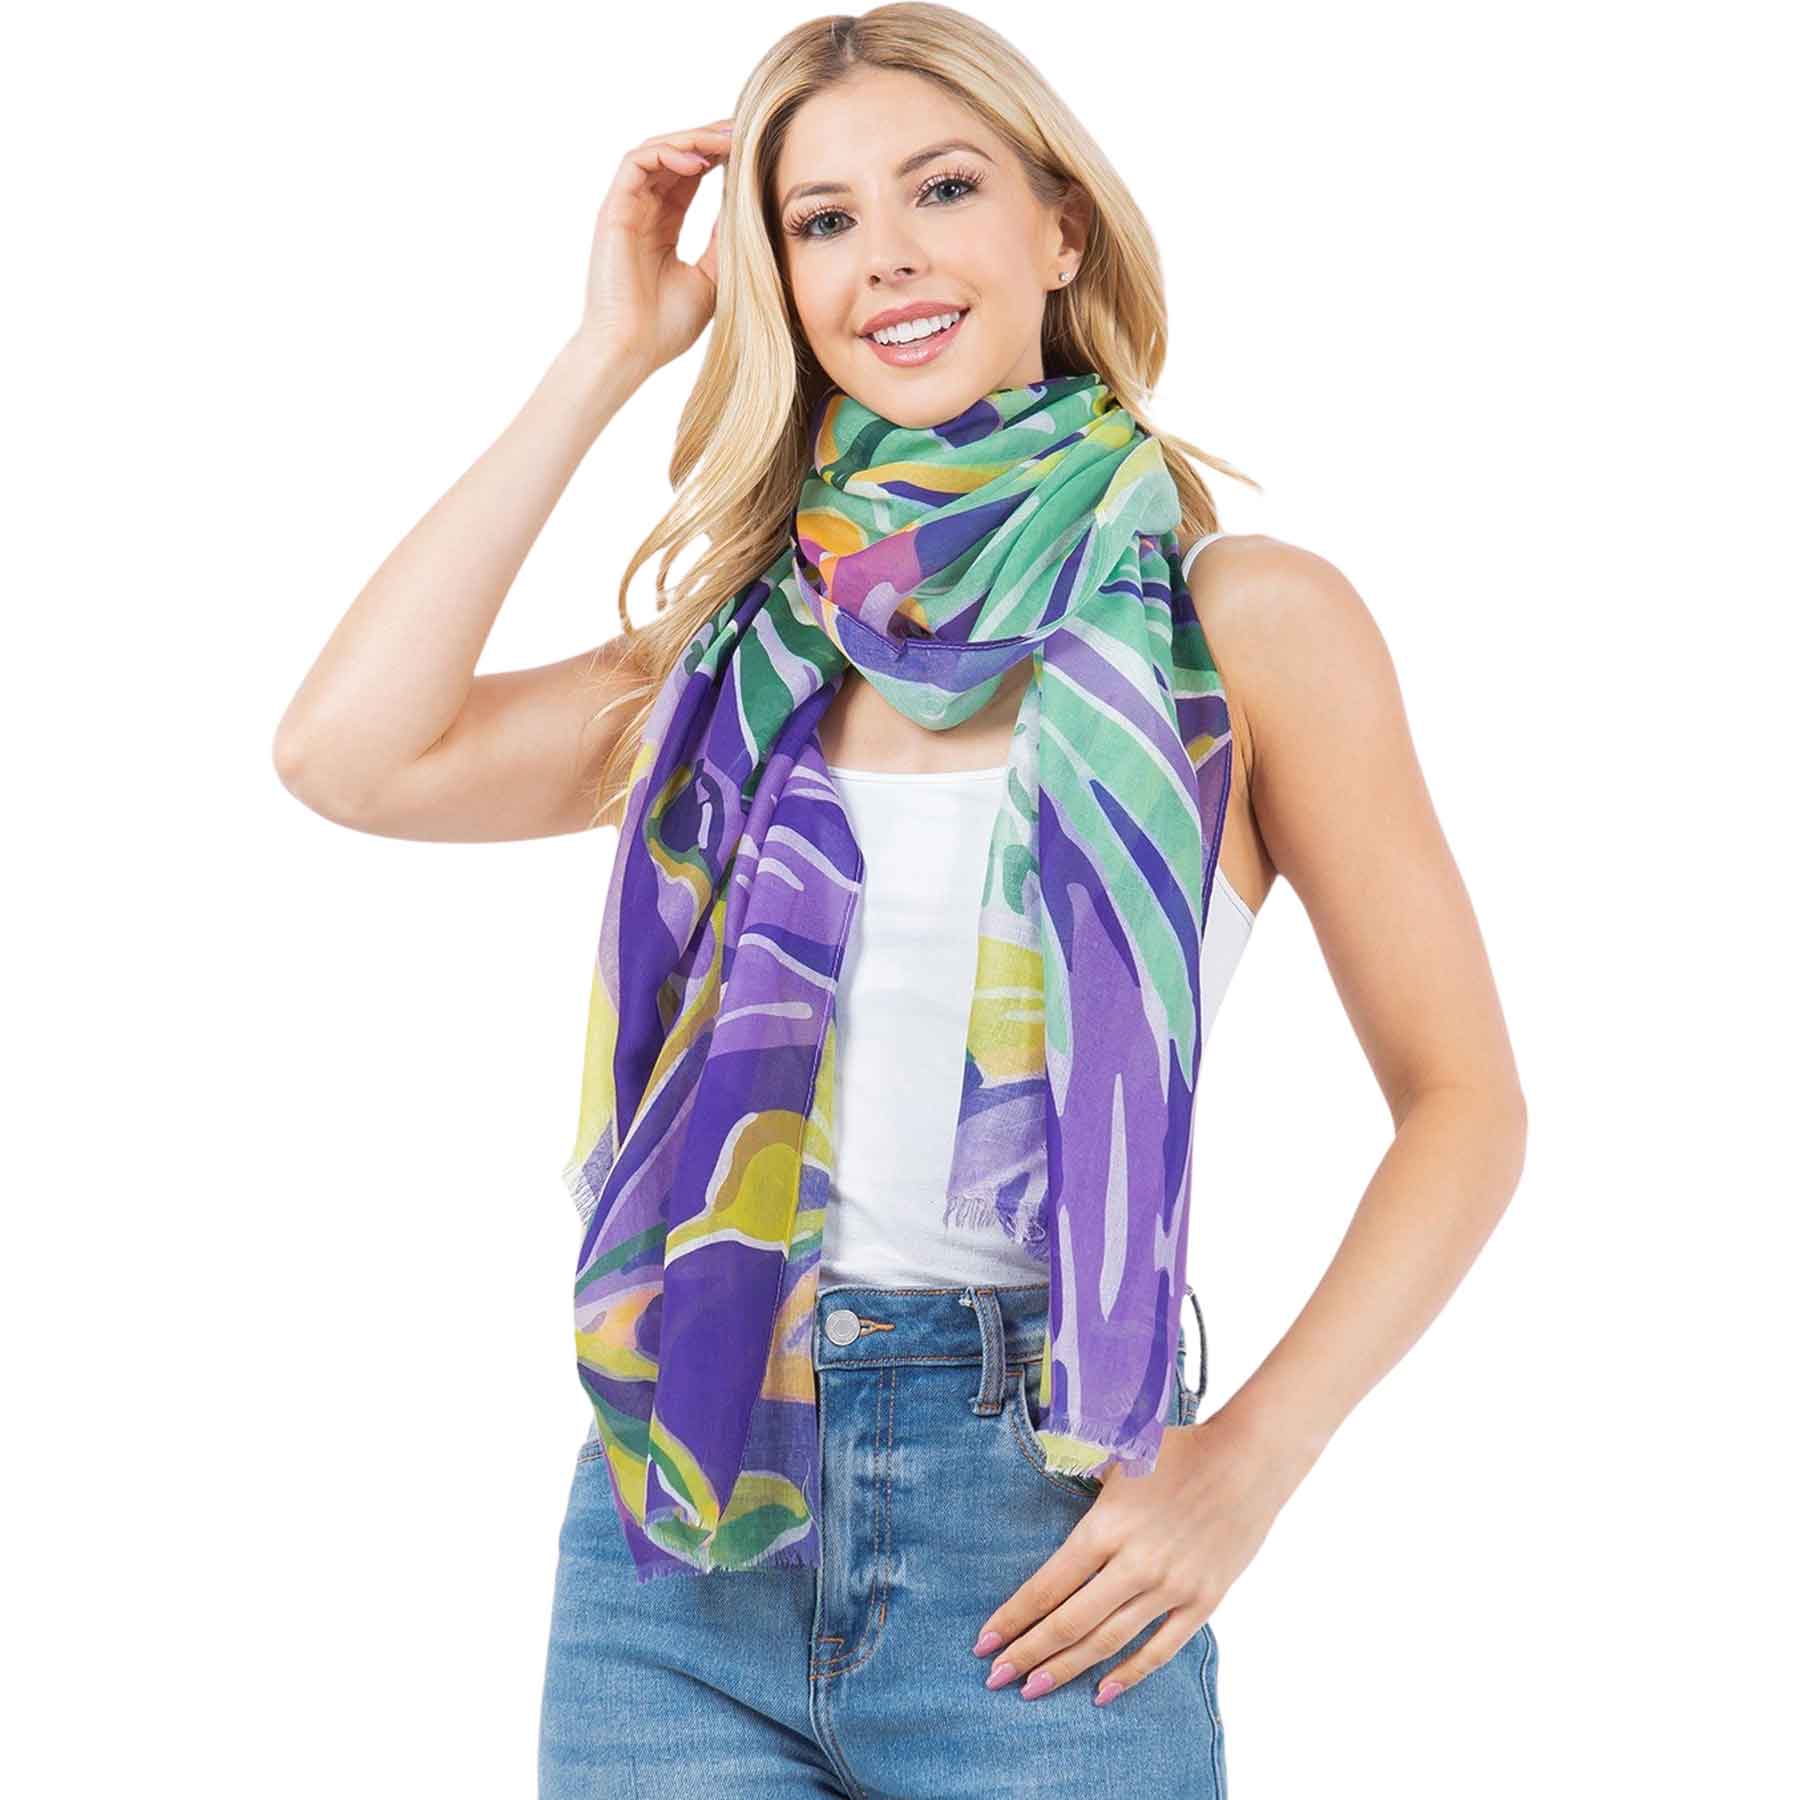 3861 - Assorted Cotton Feel Summer Scarves 4281-02
Abstract Pattern Scarf - 33